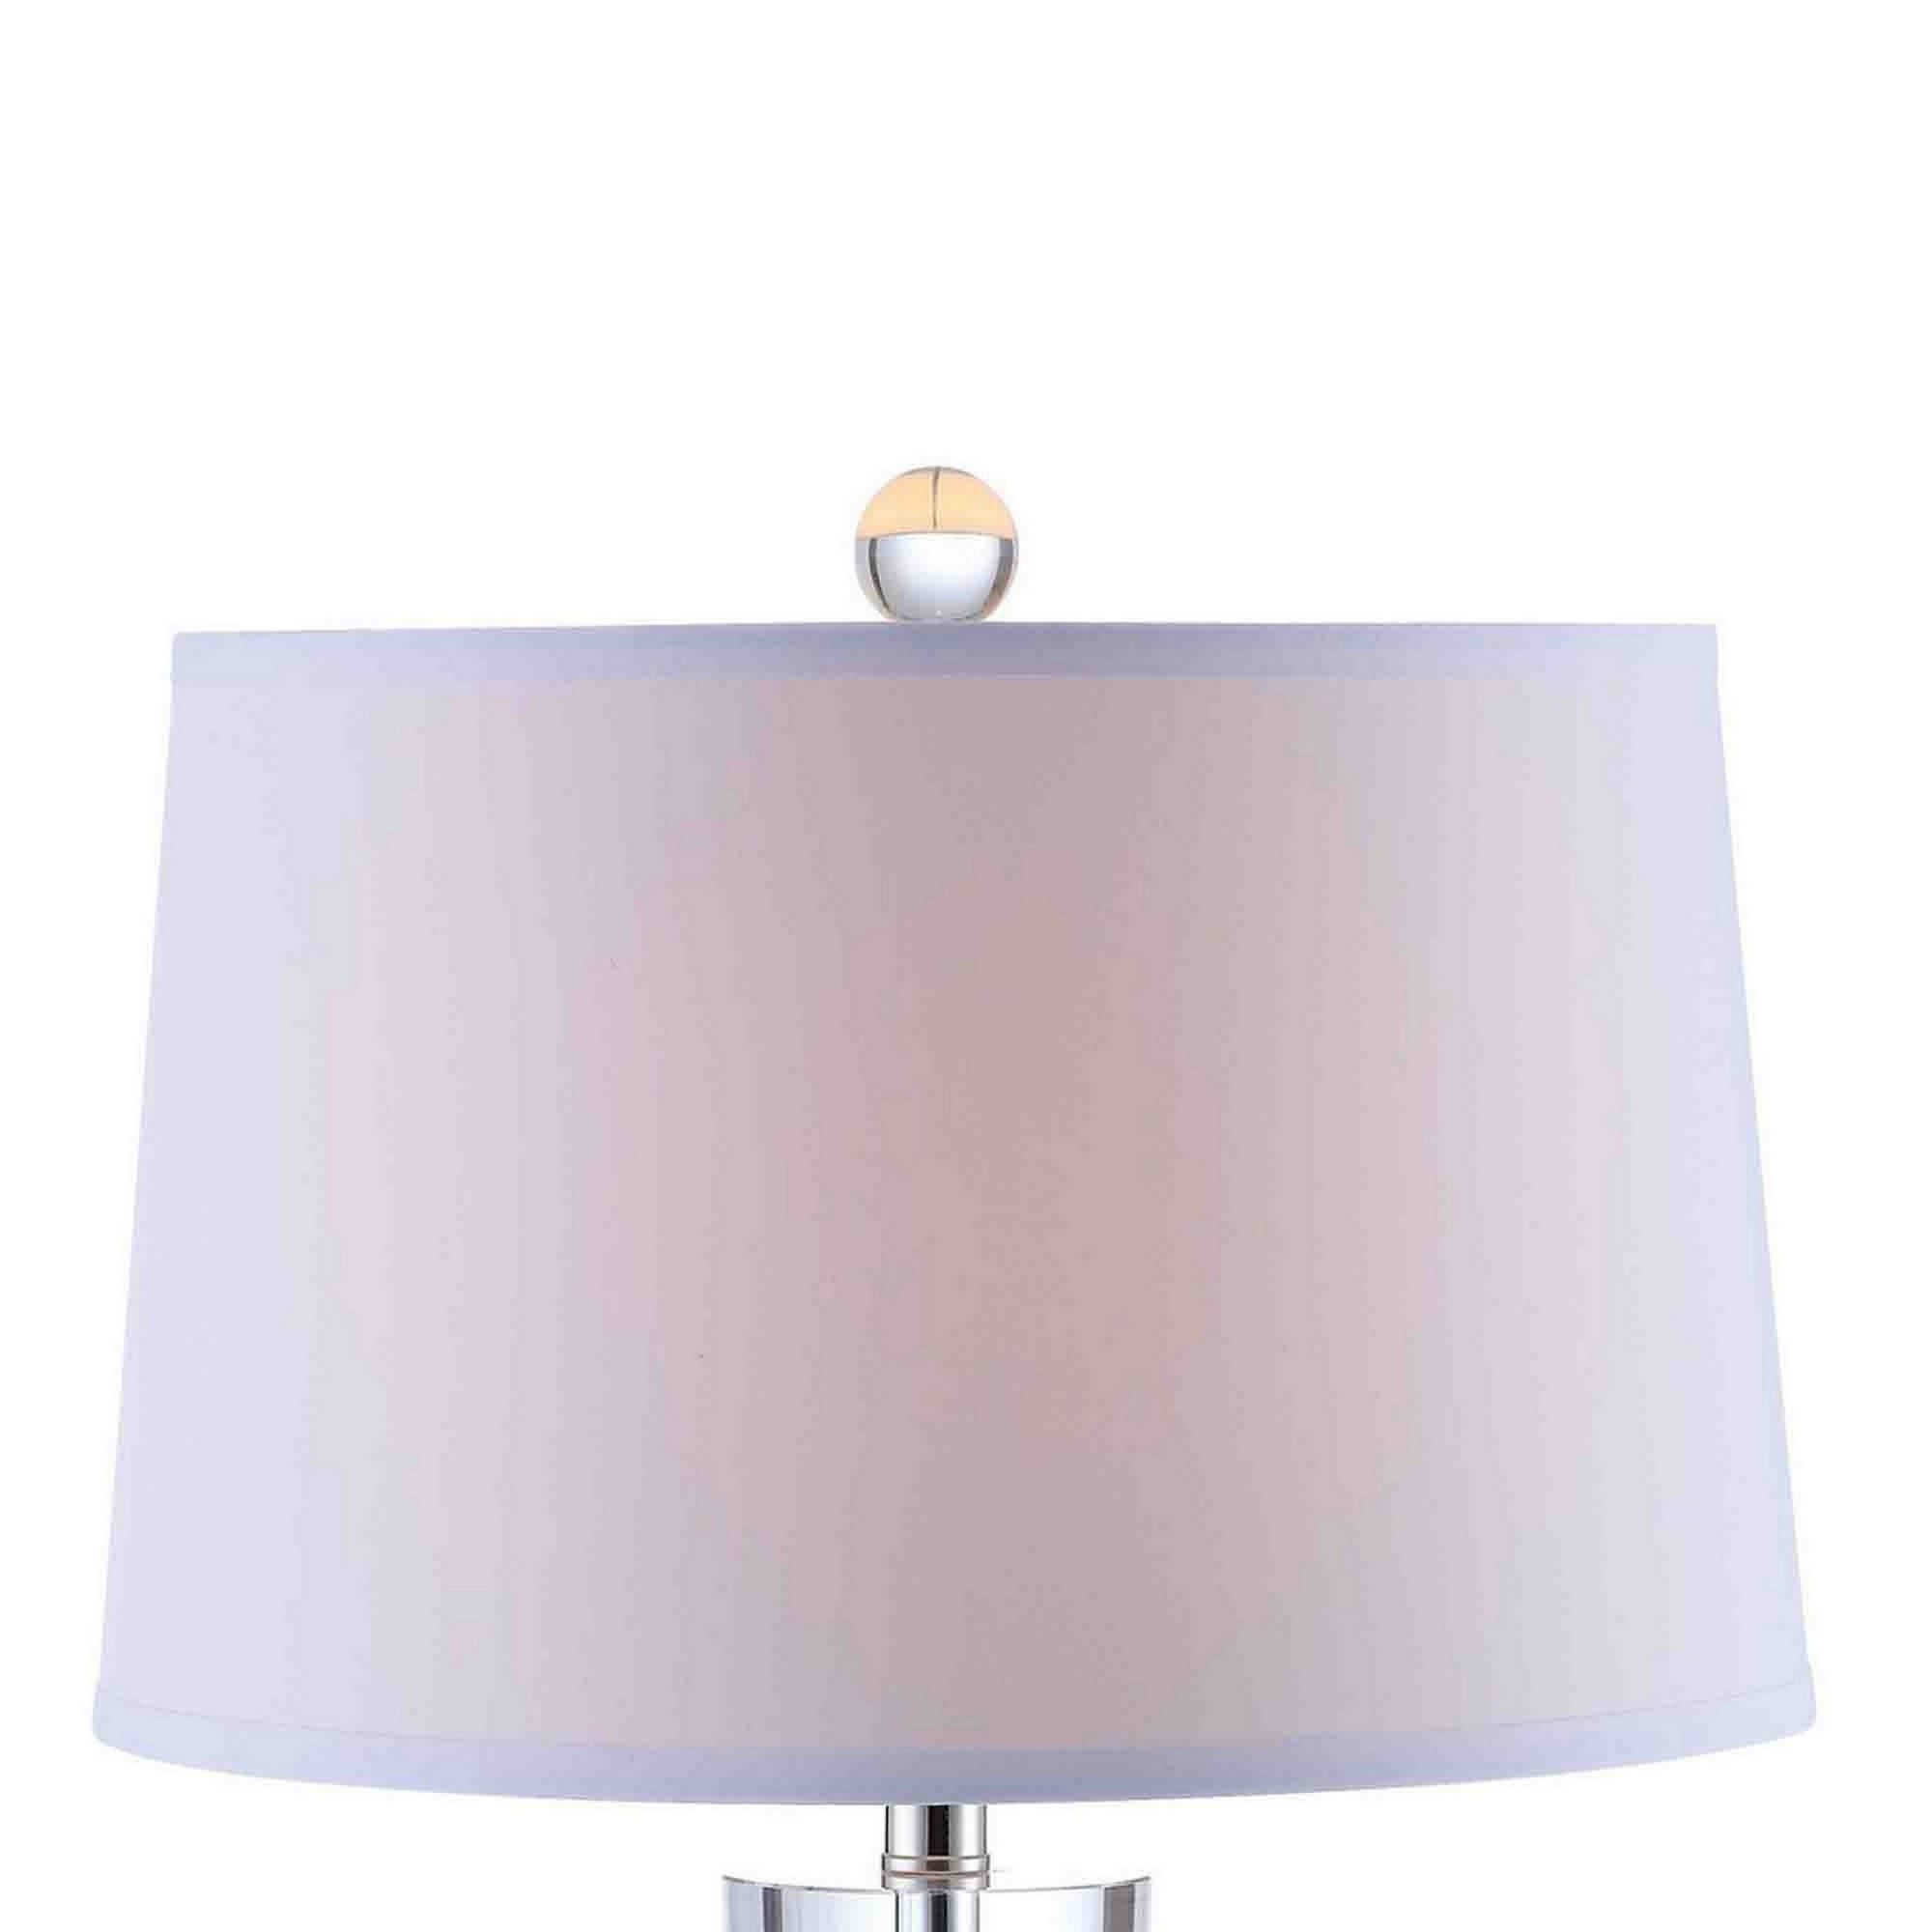 27 Inch Table Lamp With Glass Stand, Empire Shade, Metal, Clear Finish -Saltoro Sherpi